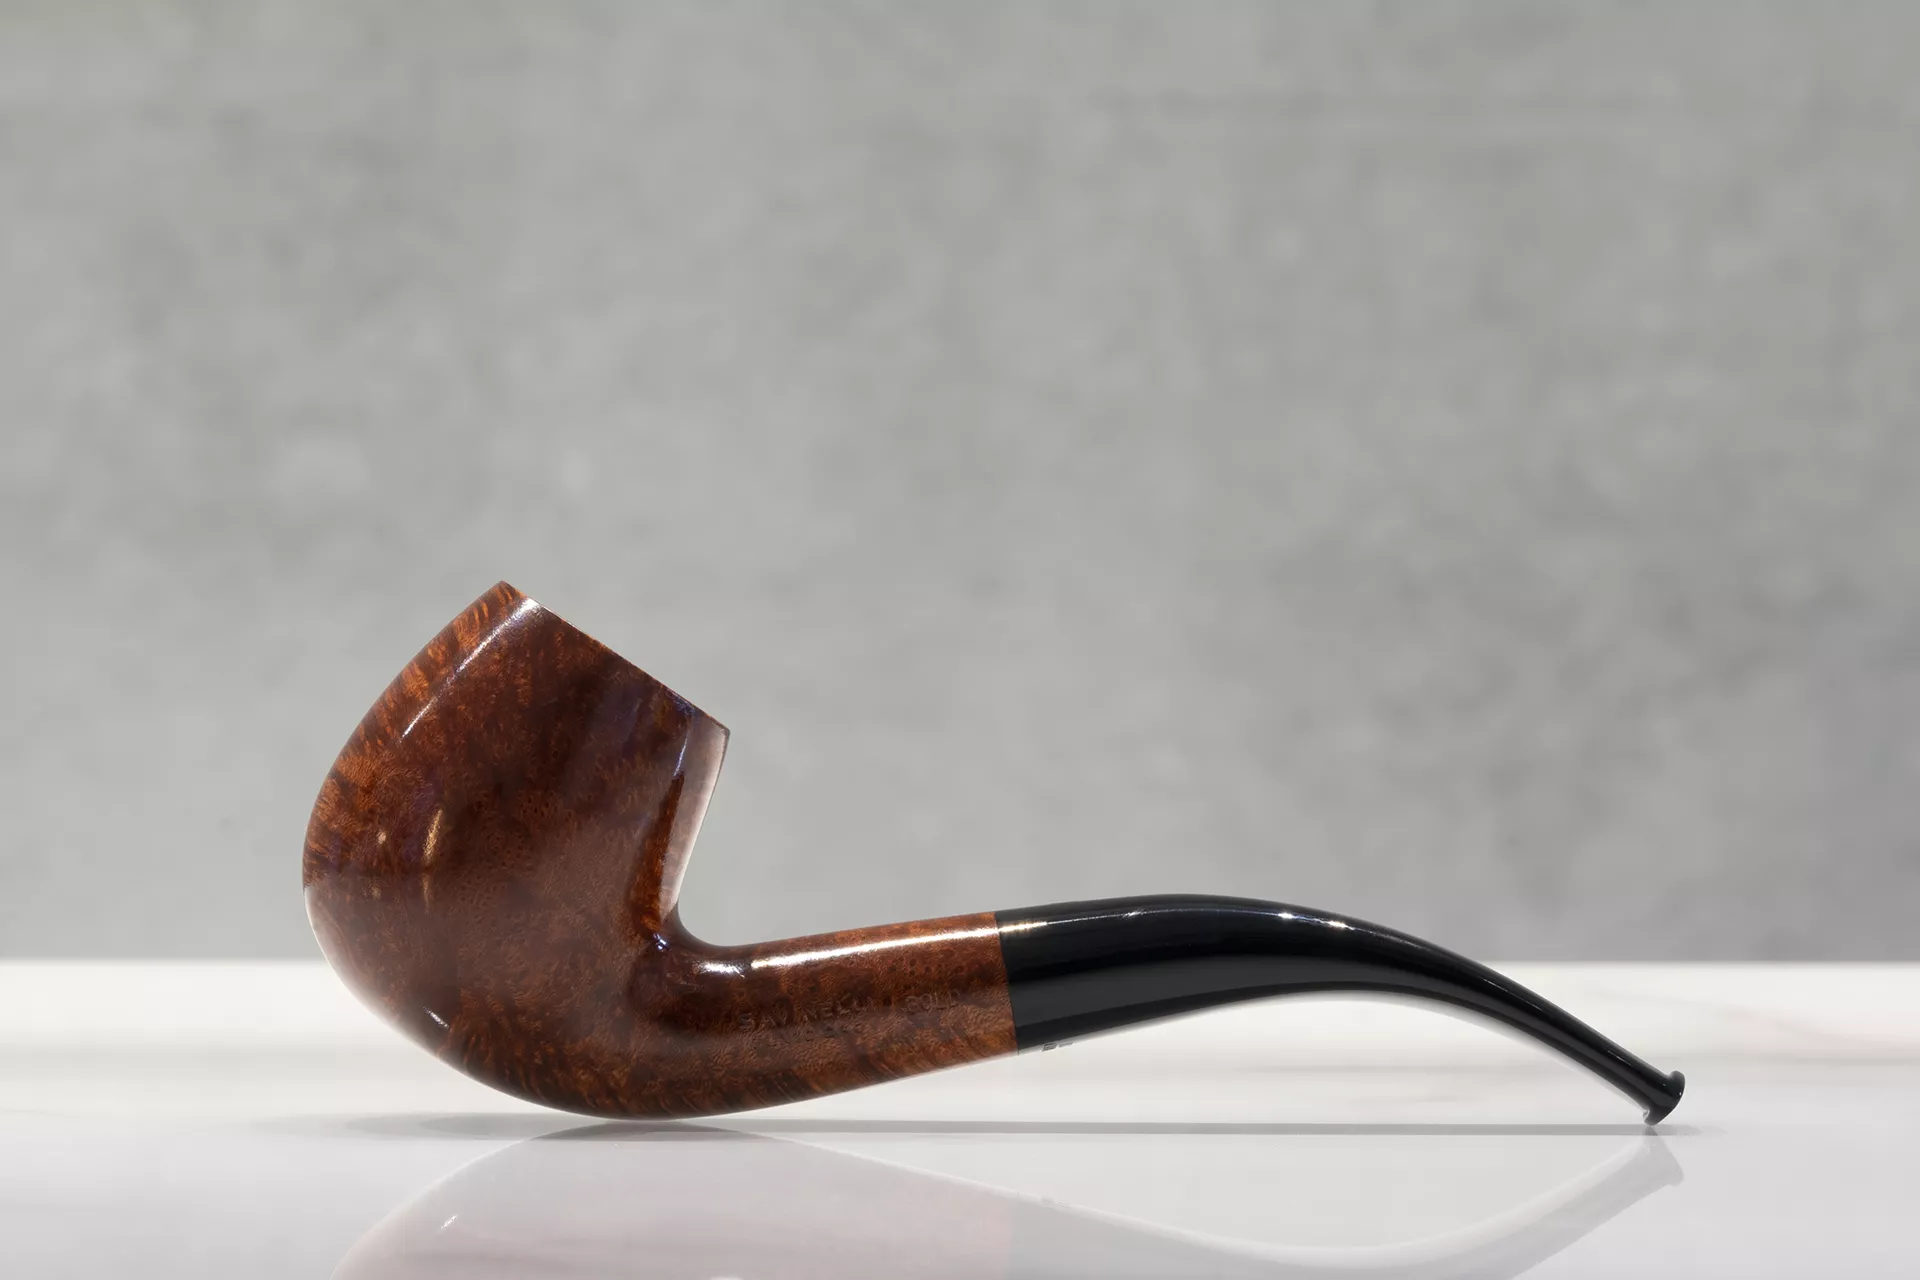 Savinelli 1876 in Italy, europe | Tobacco Products - Country Helper